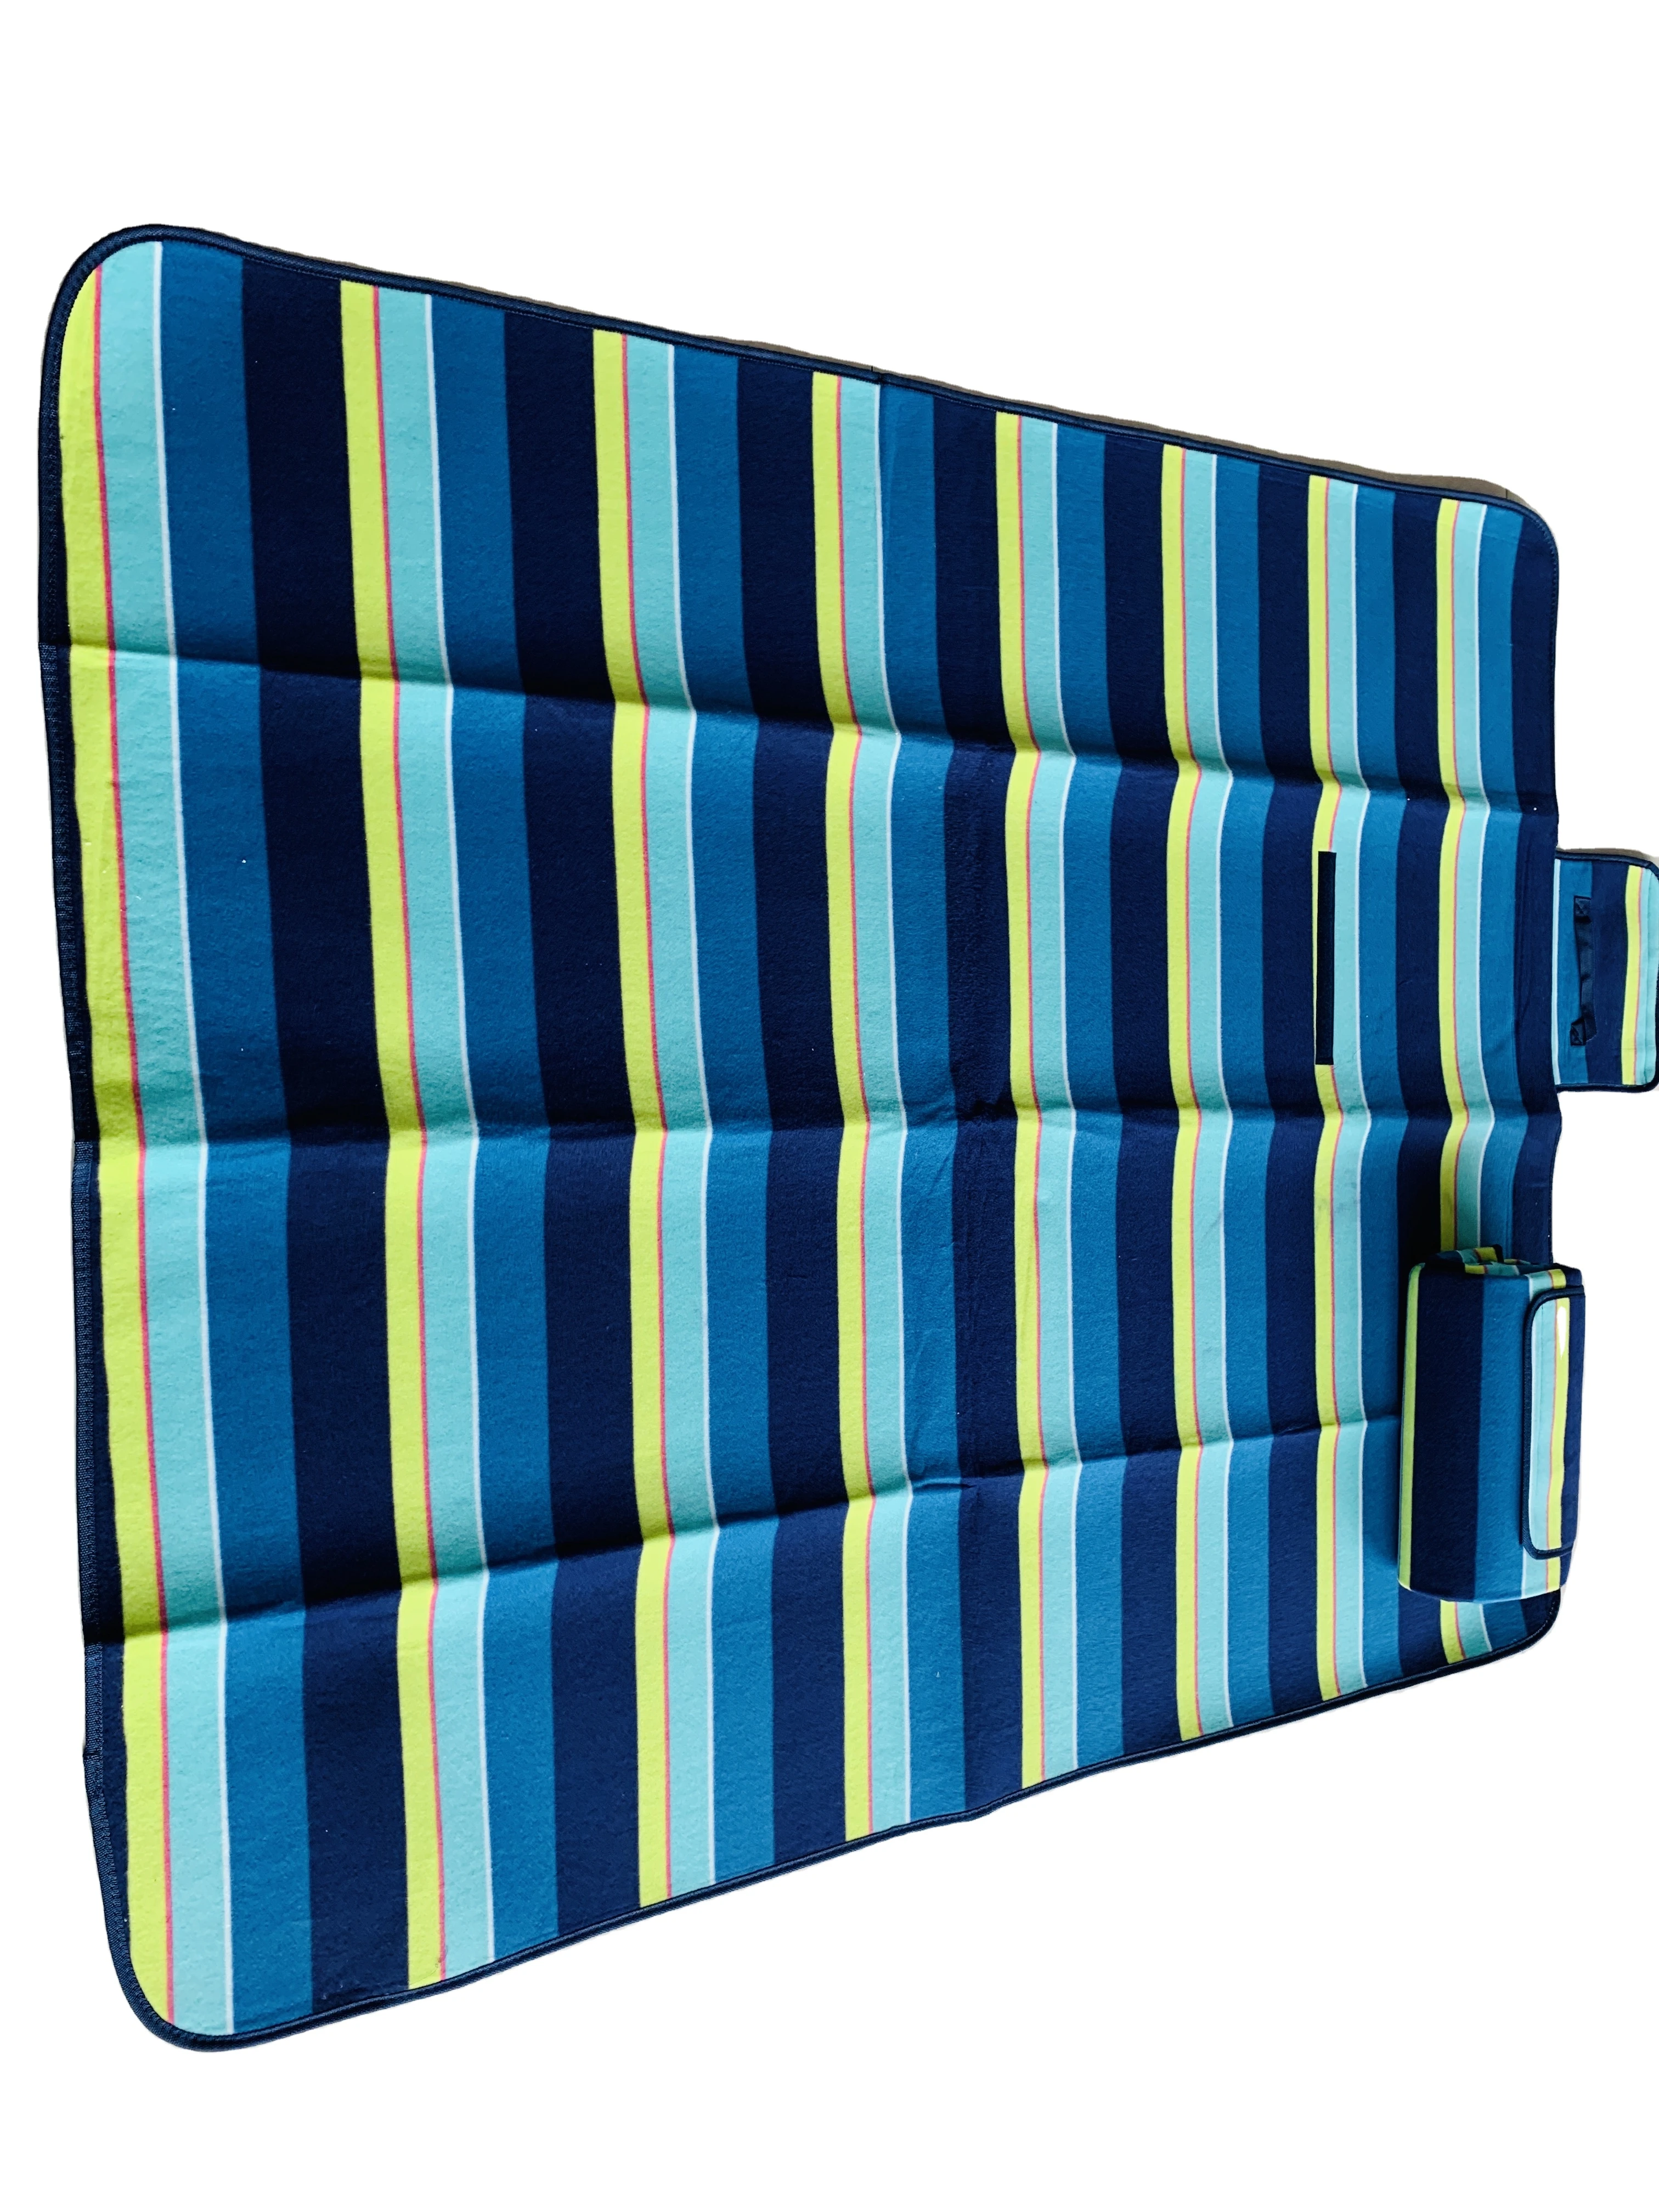 Solid Outdoor Picnic Throw Travel Blanket with Logo outdoor beach waterproof picnic blanket